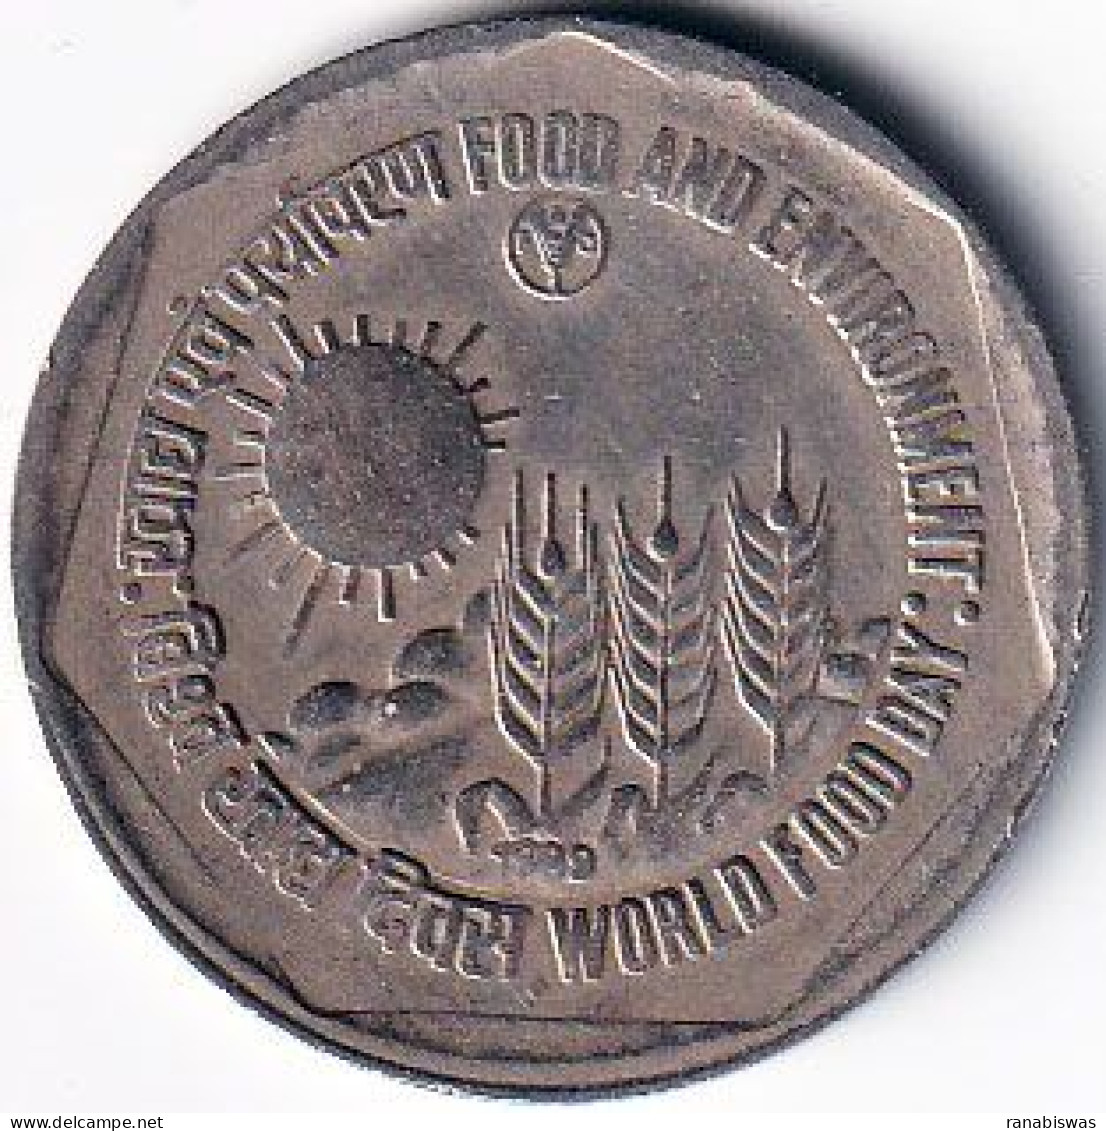 INDIA COIN LOT 33, 1 RUPEE 1989, FOOD & ENVIRONMENT, FAO, BOMBAY MINT, XF, SCARE - India